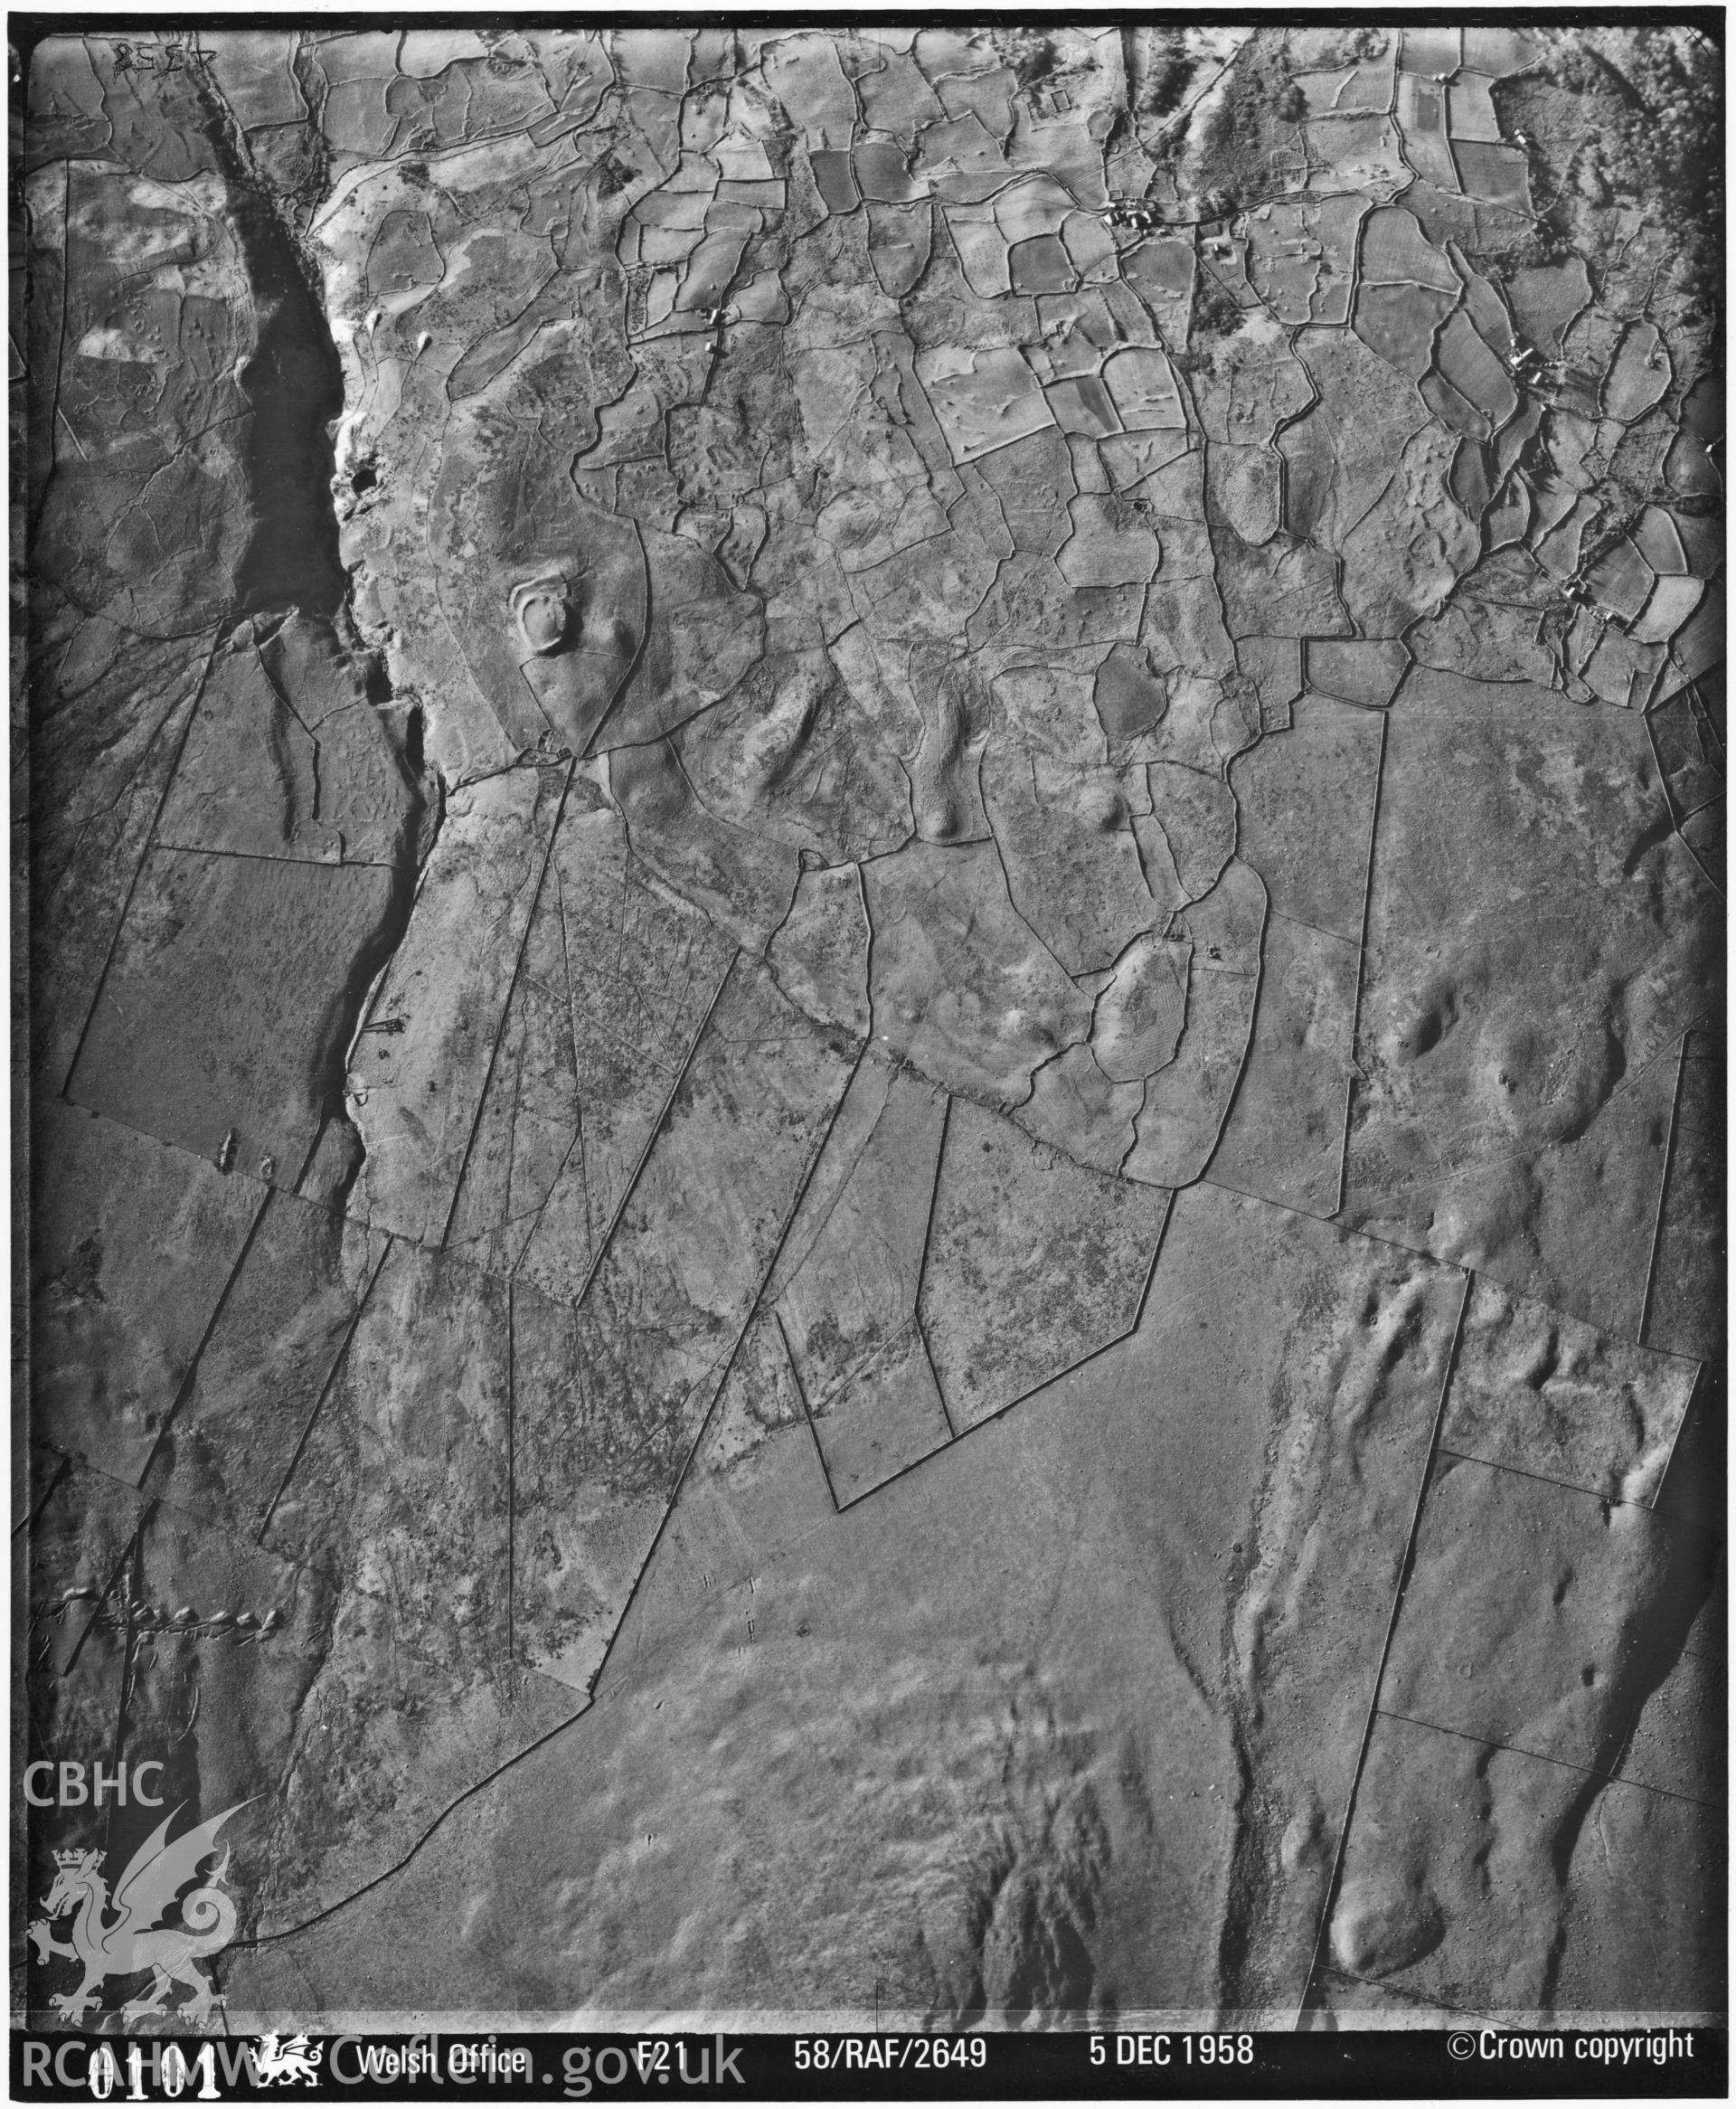 Black and white vertical aerial photograph showing Pen y Dinas, taken by the RAF 1958.